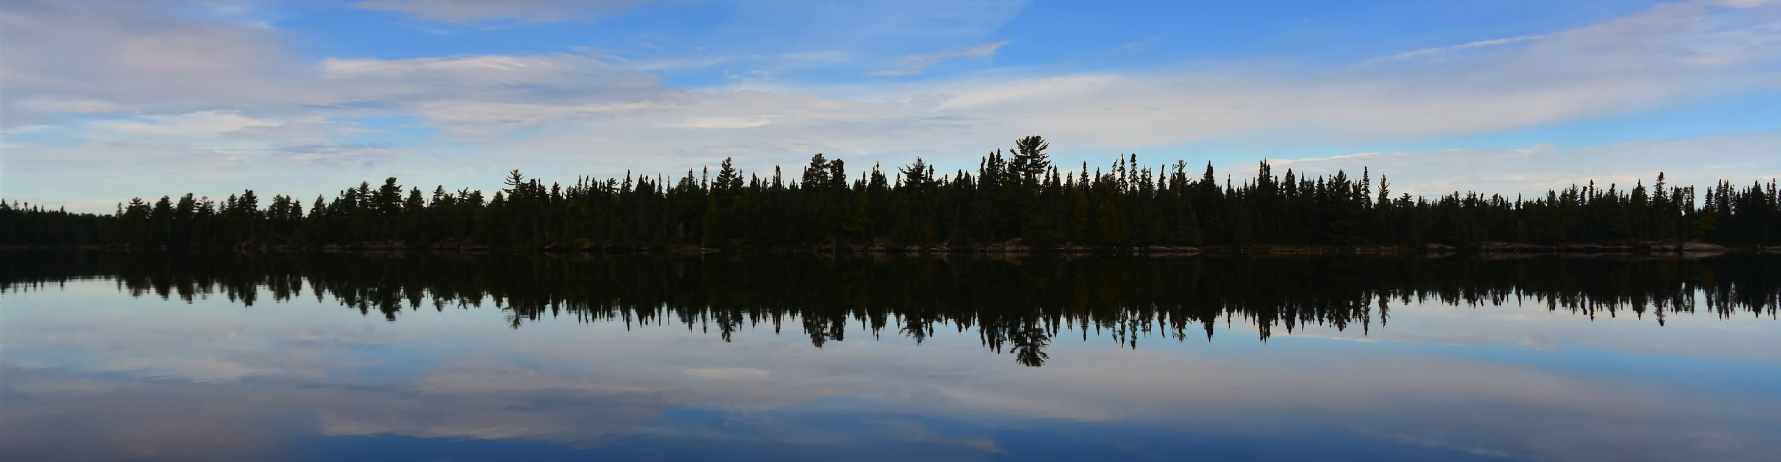 Boreal forest in Northern Ontario, outlined against a sunset sky with the water reflecting the sky.